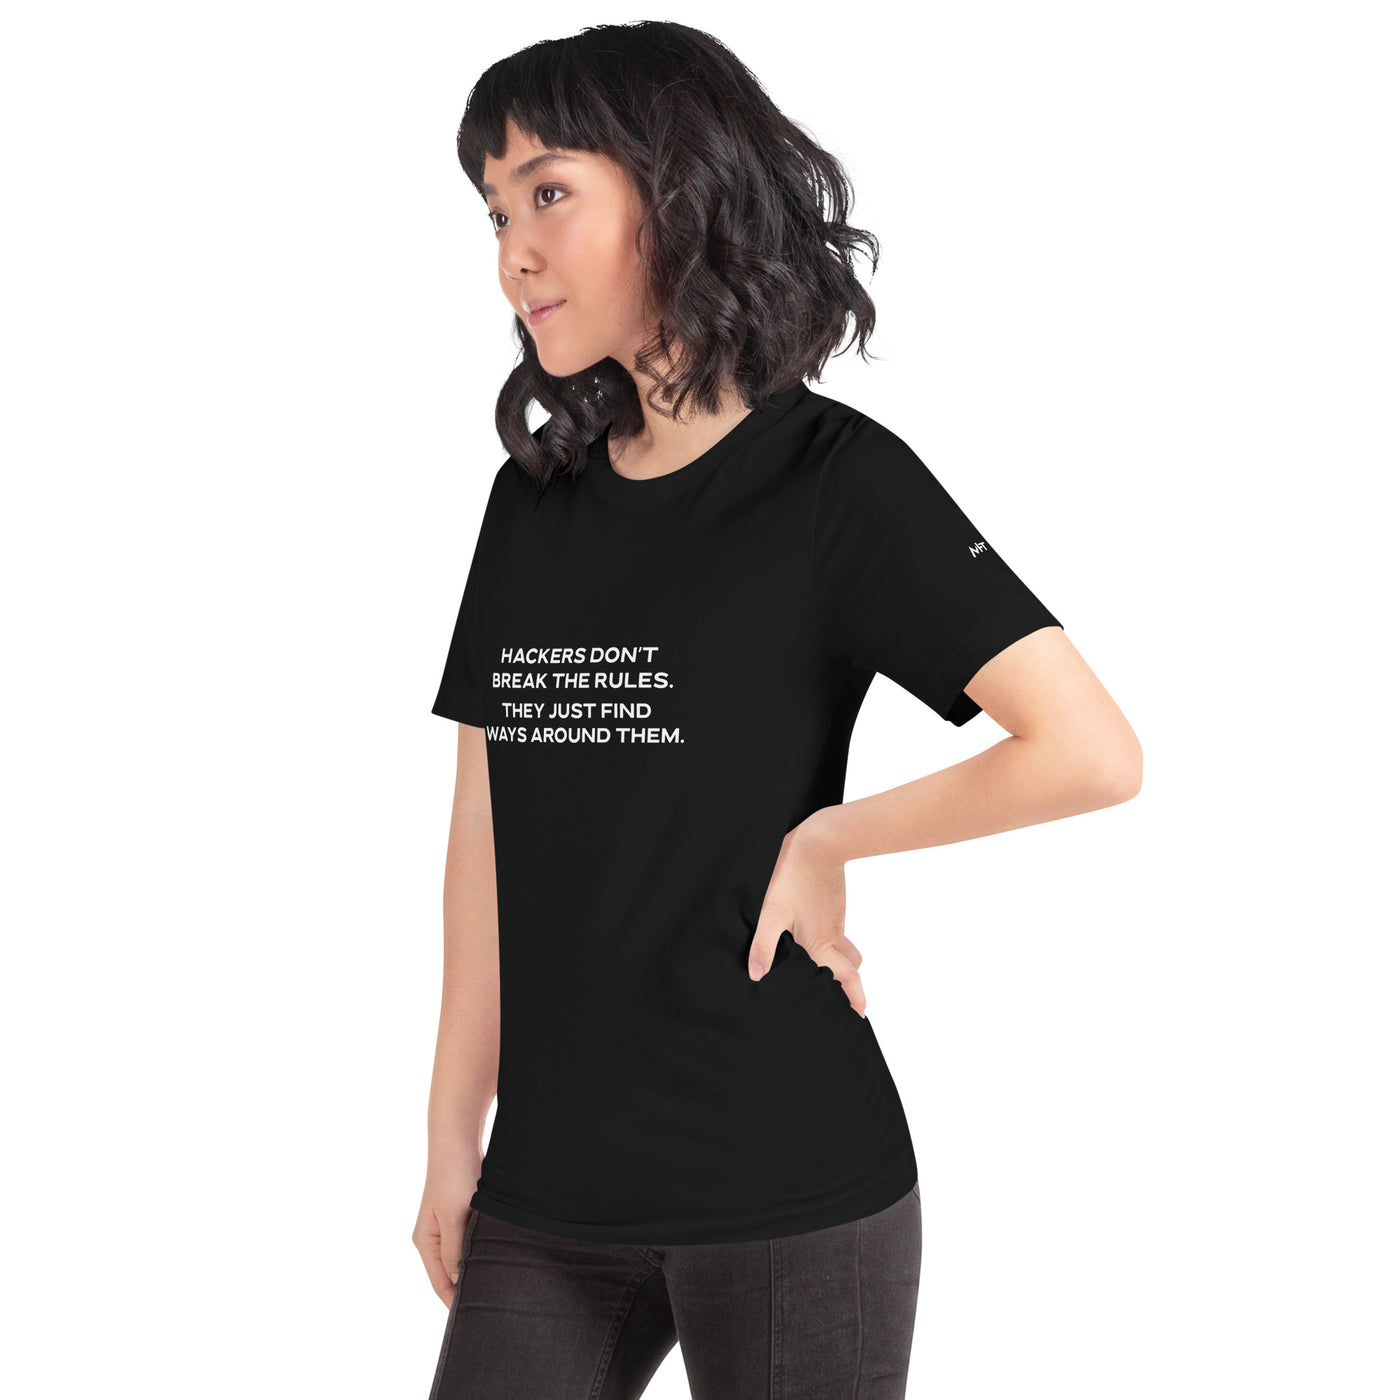 Hackers don't break the rules, they just find ways around them V2 - Unisex t-shirt